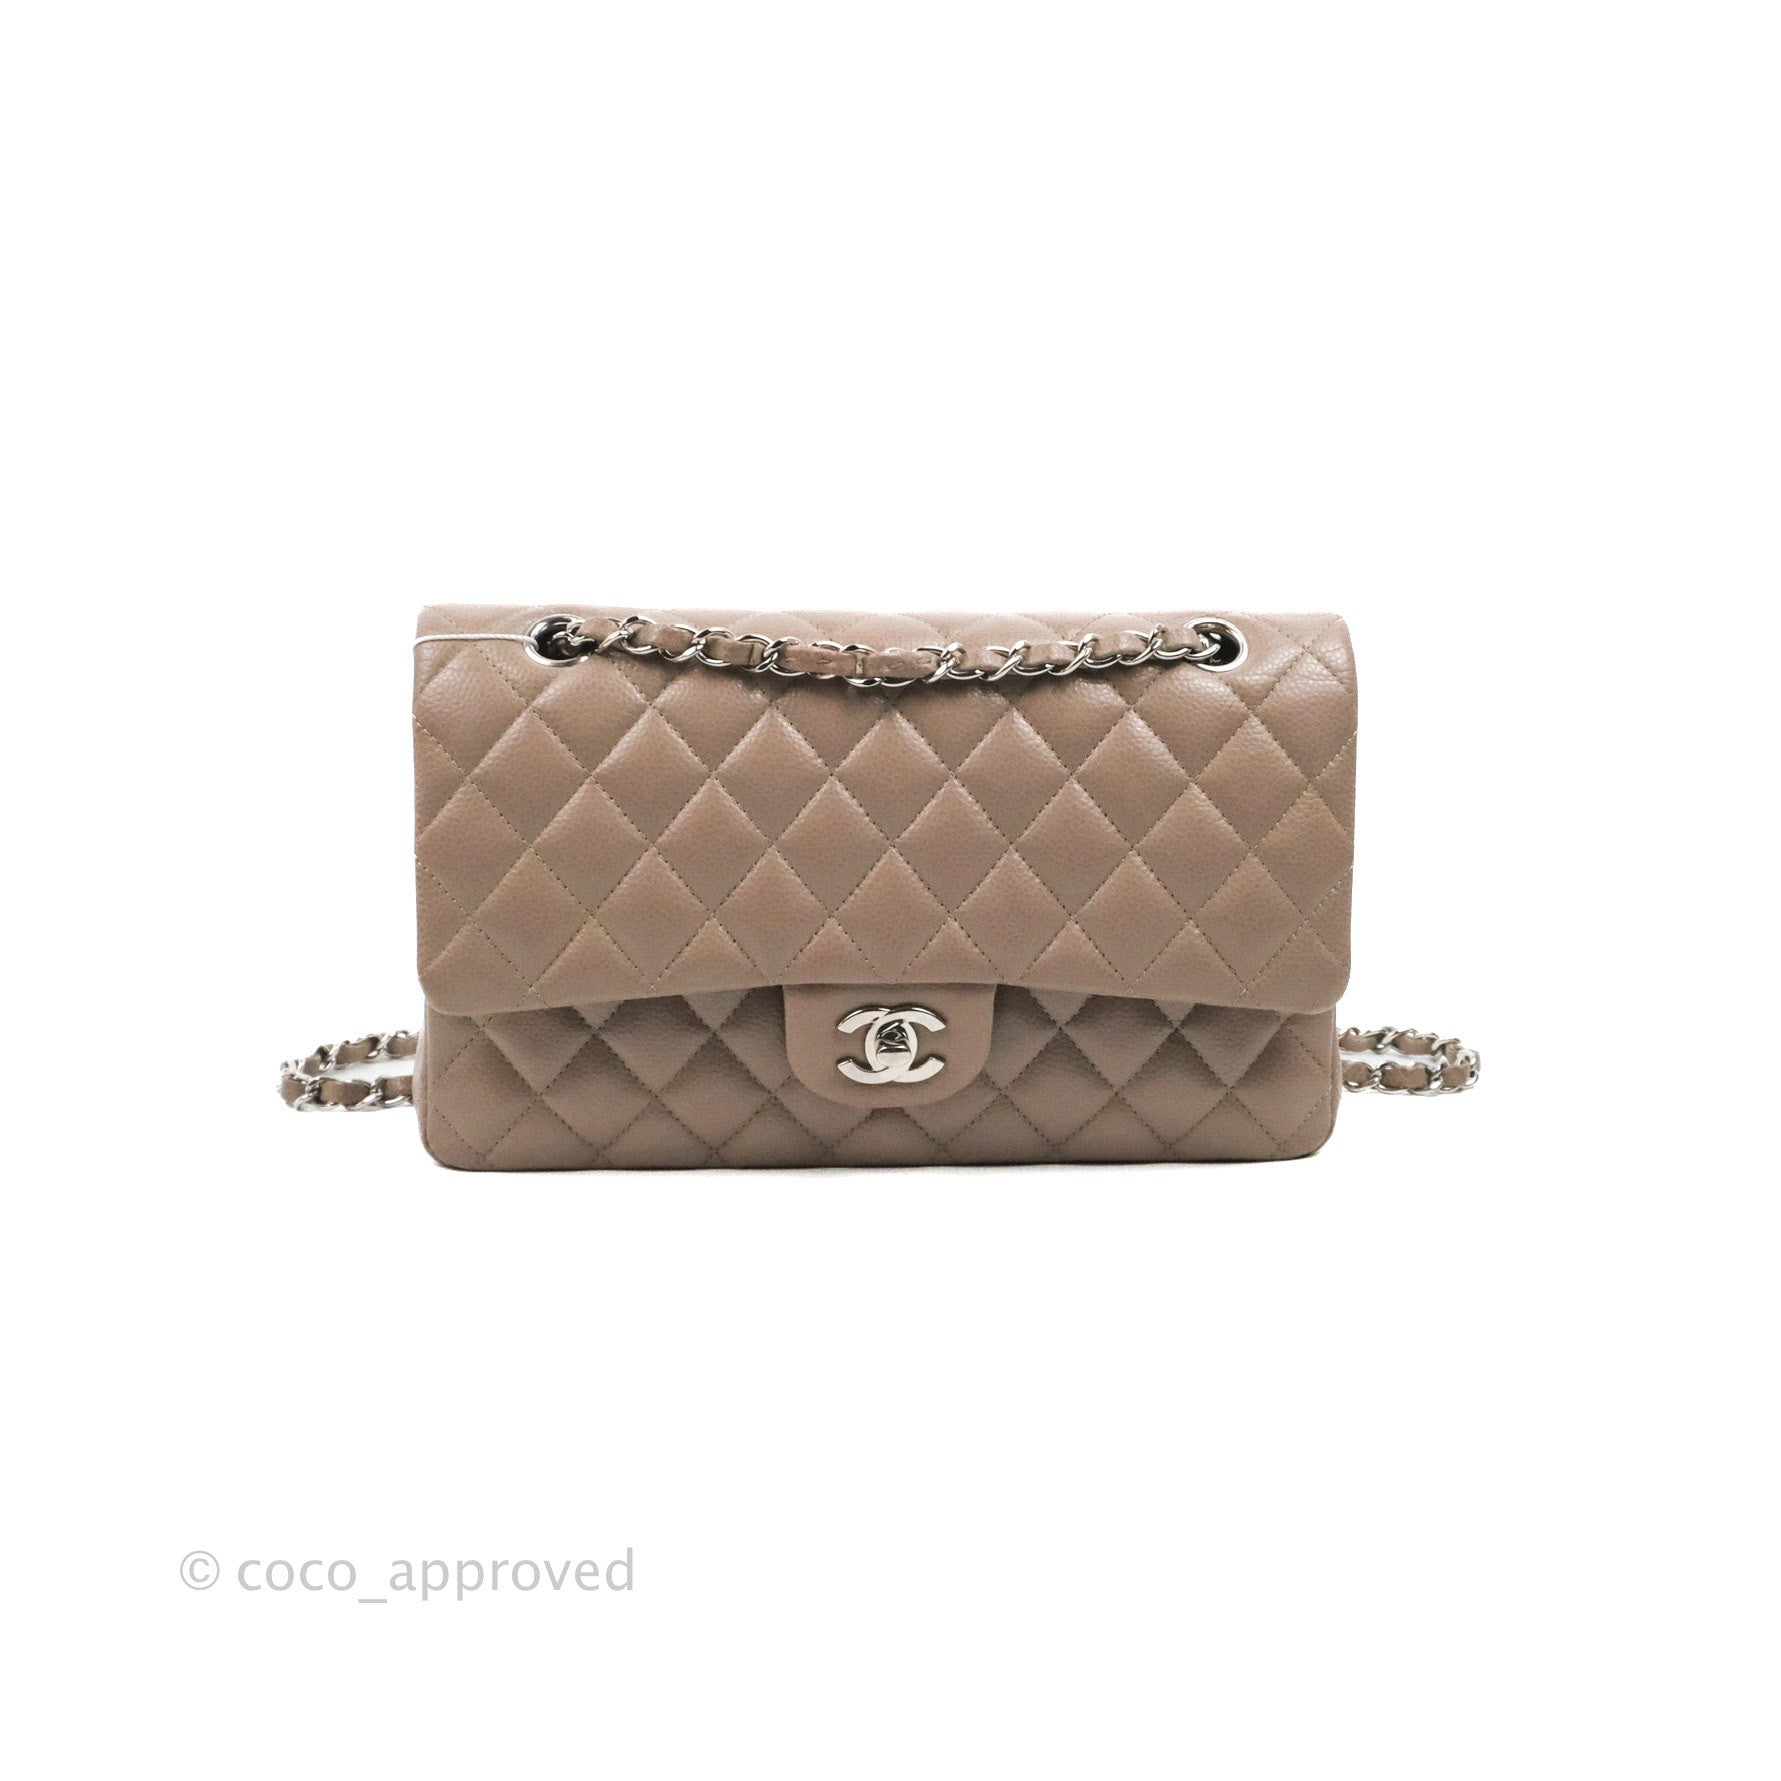 Chanel Jumbo Classic Flap Review  Luxury Shopping – the petite piggy